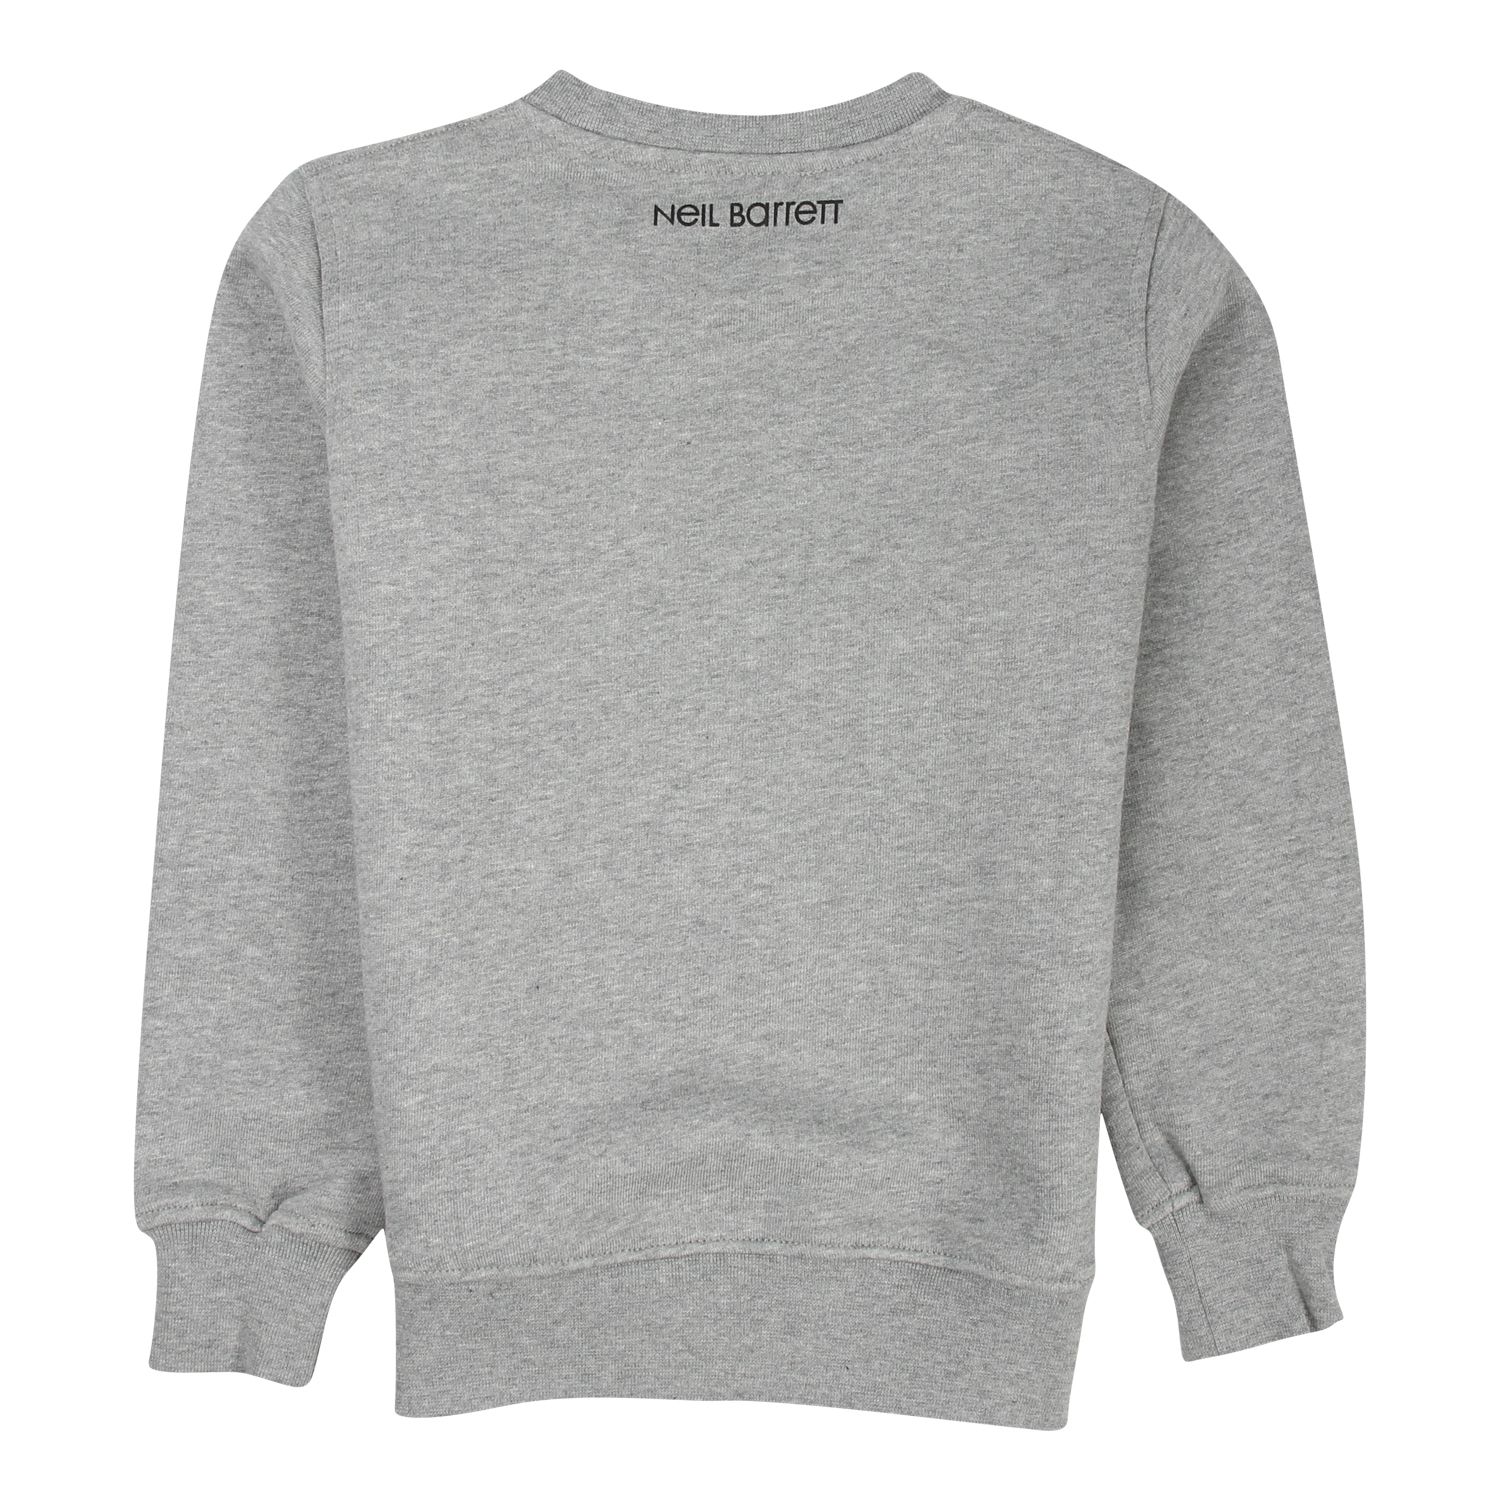 Neil Barrett melange gray sweatshirt -Details long-sleeved sweatshirt with elastic cuffs, U-neck, gray background, front with lightning bolt depicted in the center in large size, basic back with visible logo -Washing max 30 °